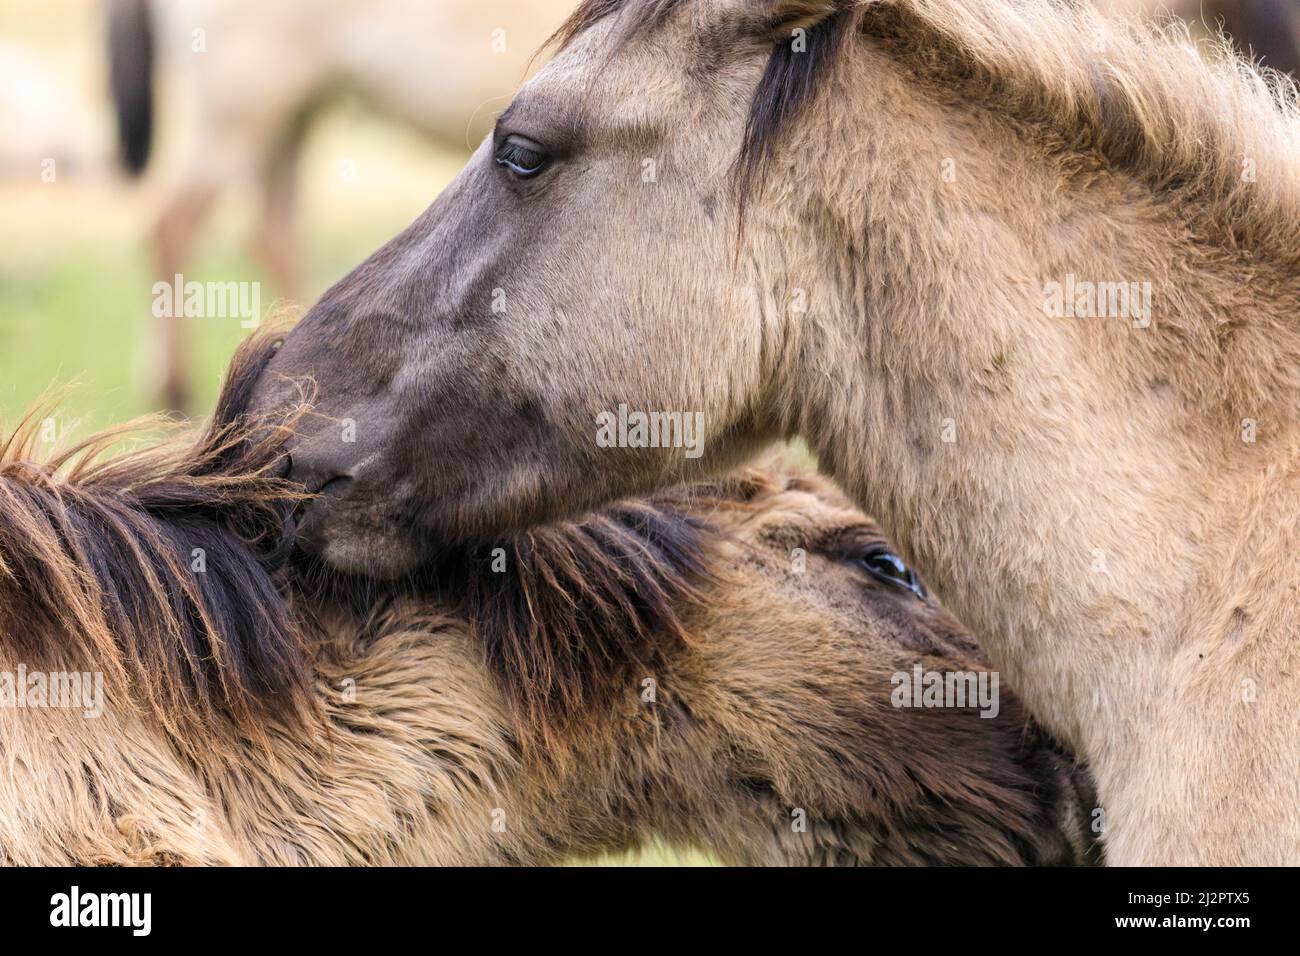 Mehrfelder Bruch, NRW, Germany. 04th Apr, 2022. Two of the horses groom each other. A herd of over 300 of of Dülmen Ponies an endangered species and ancient breed, live in feral conditions, but in a protected areas of c. 350 hectares with woods and grassland at Merfelder Bruch Nature Reserve. The herd lives in family clans with very little human interference apart from occasional provision of hay in winter. Credit: Imageplotter/Alamy Live News Stock Photo